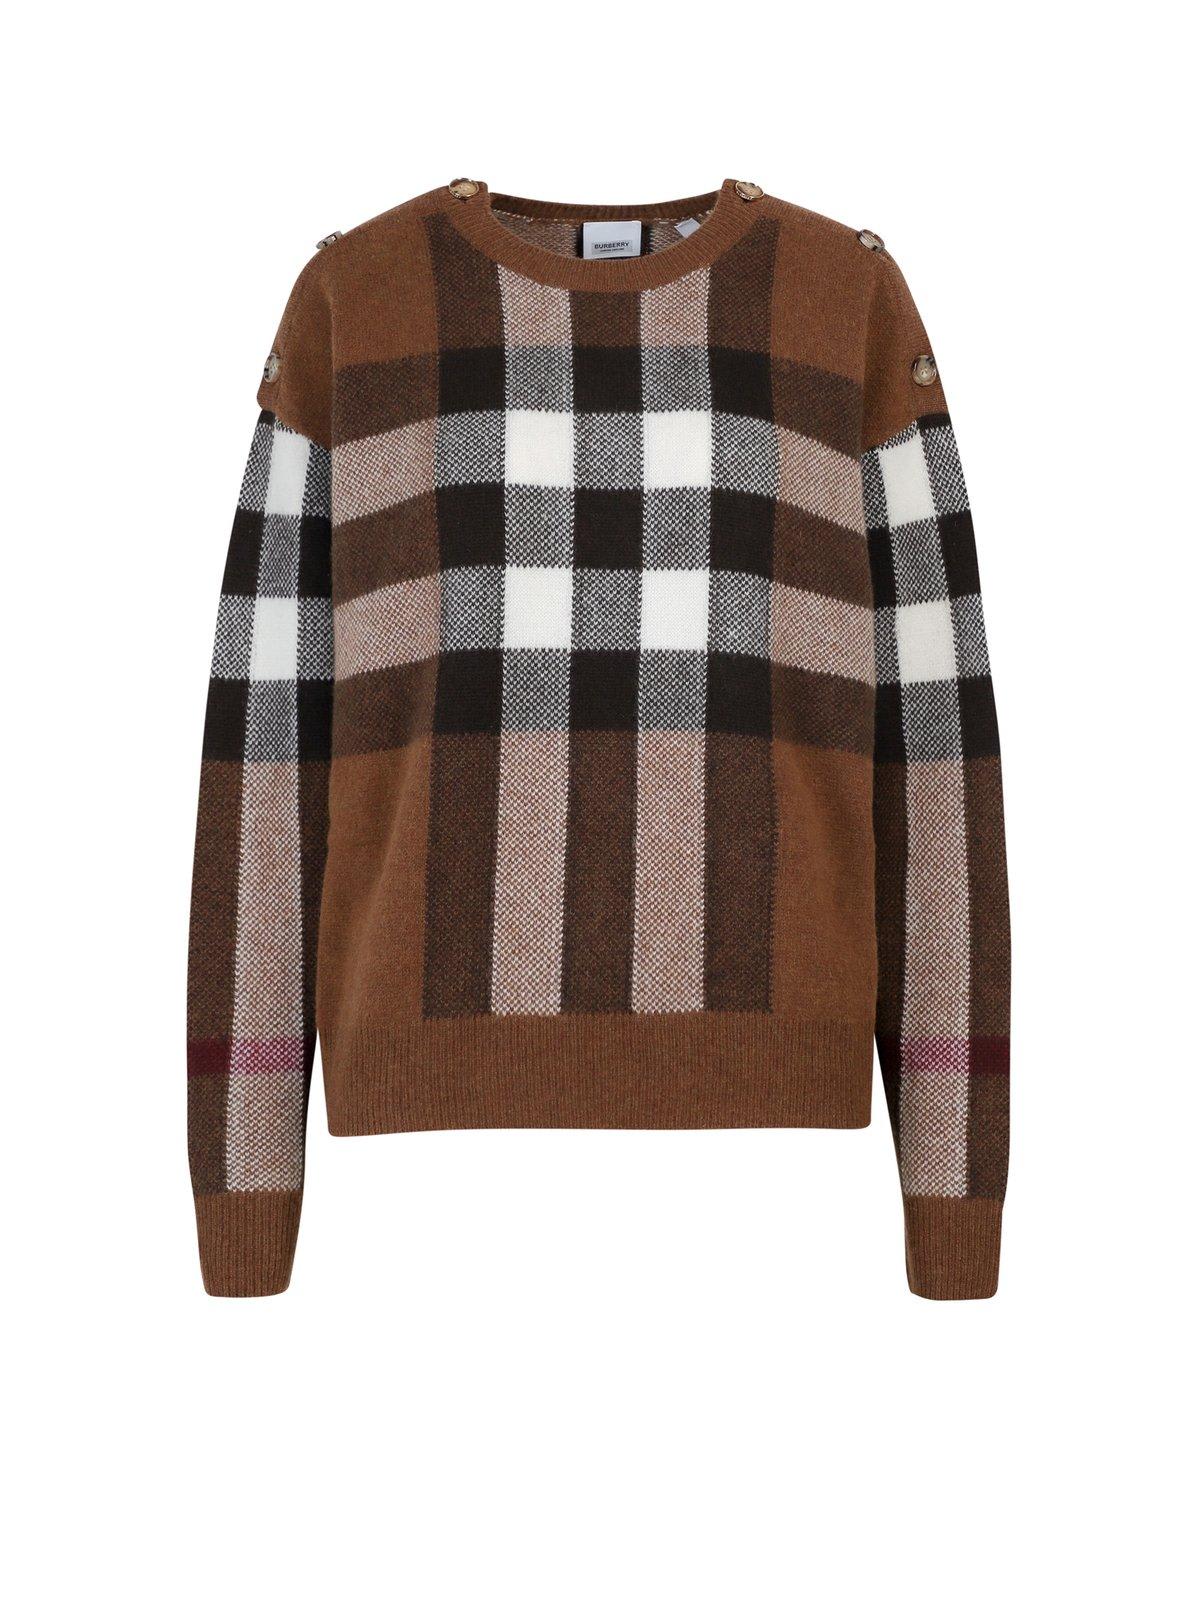 Vintage Check Sweater